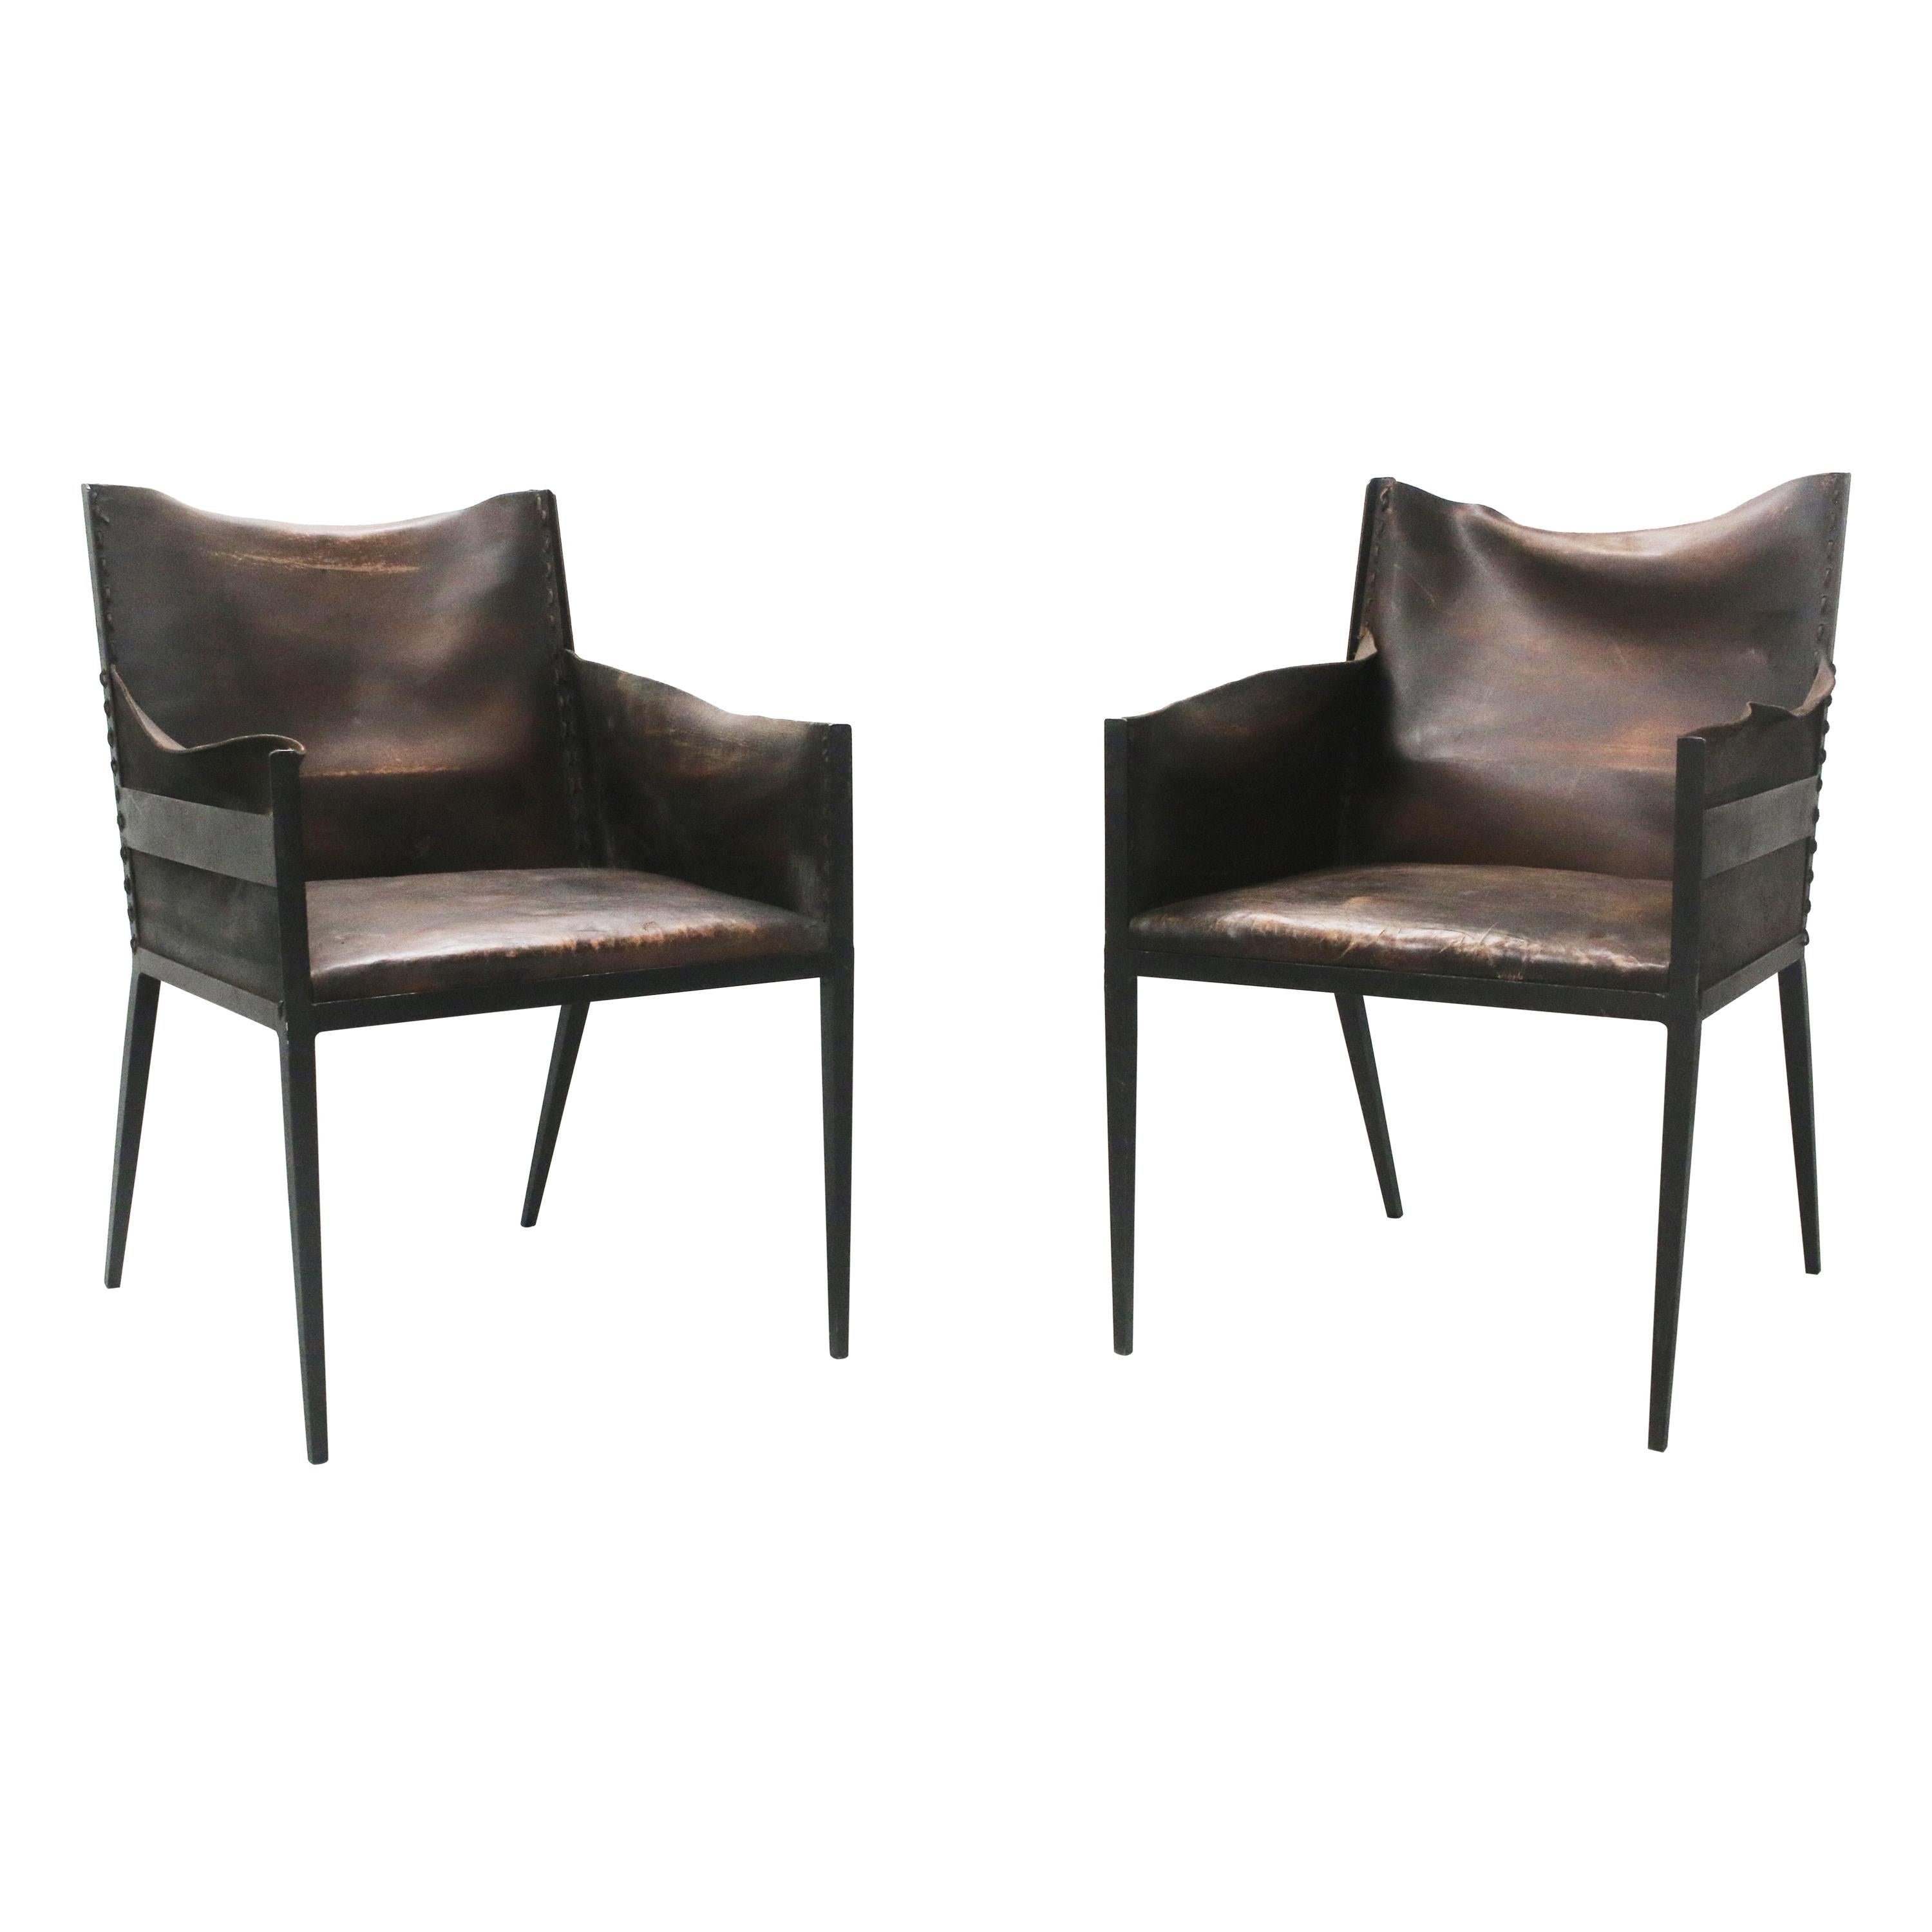 Iron and Leather Chairs, in the Manner of Jean-Michel Frank, France